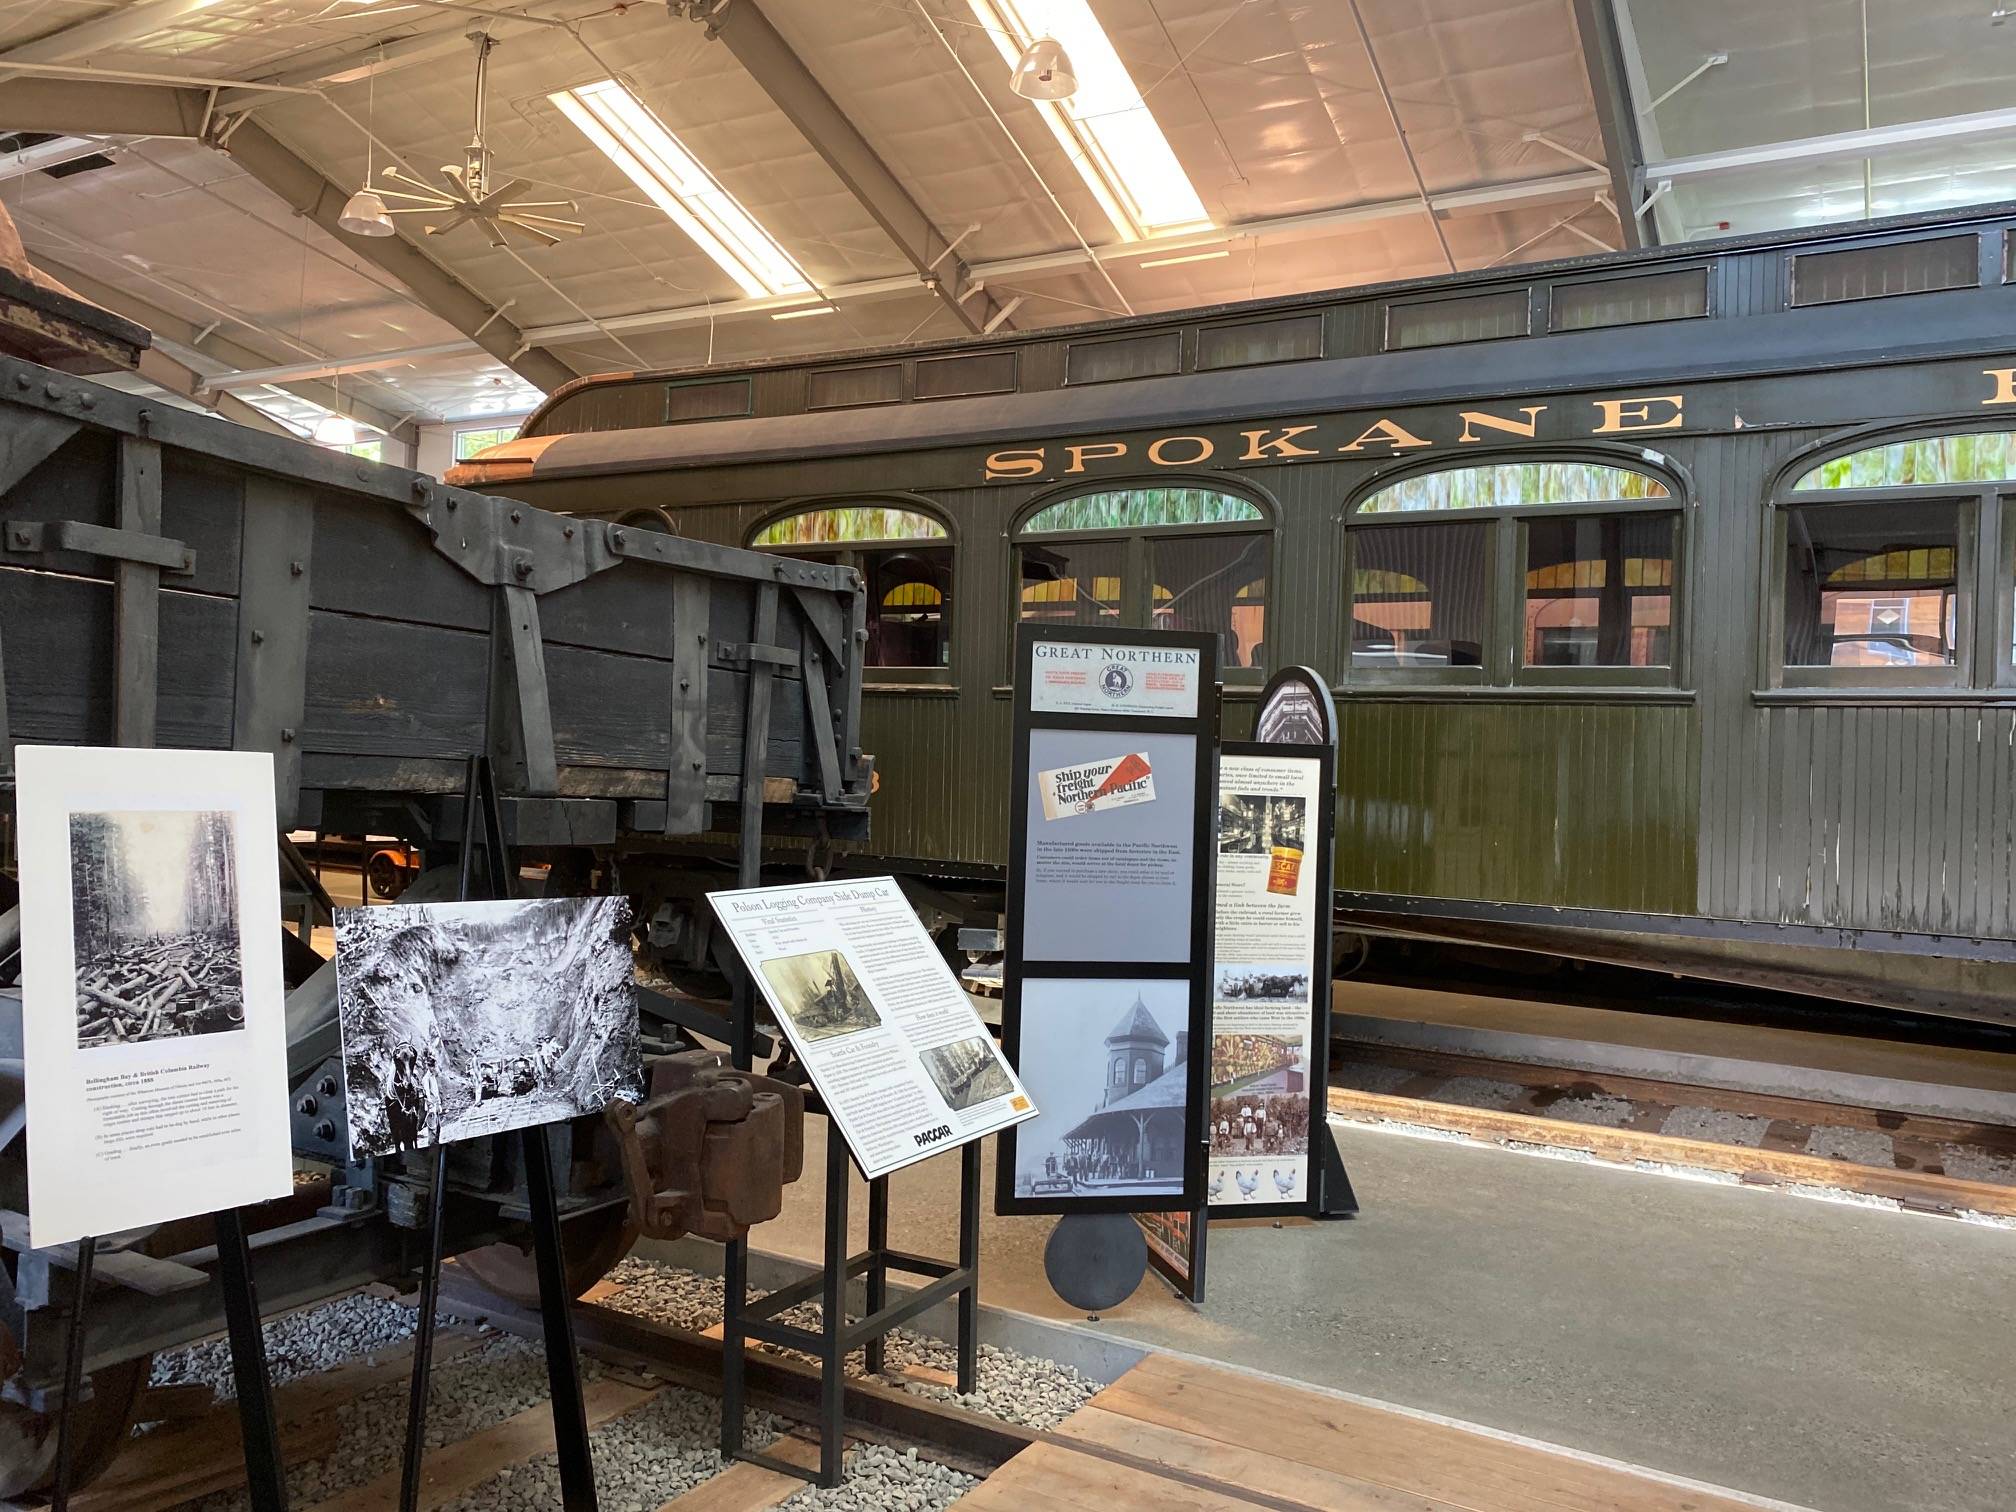 Snoqualmie’s Train Shed reopens Sept. 11